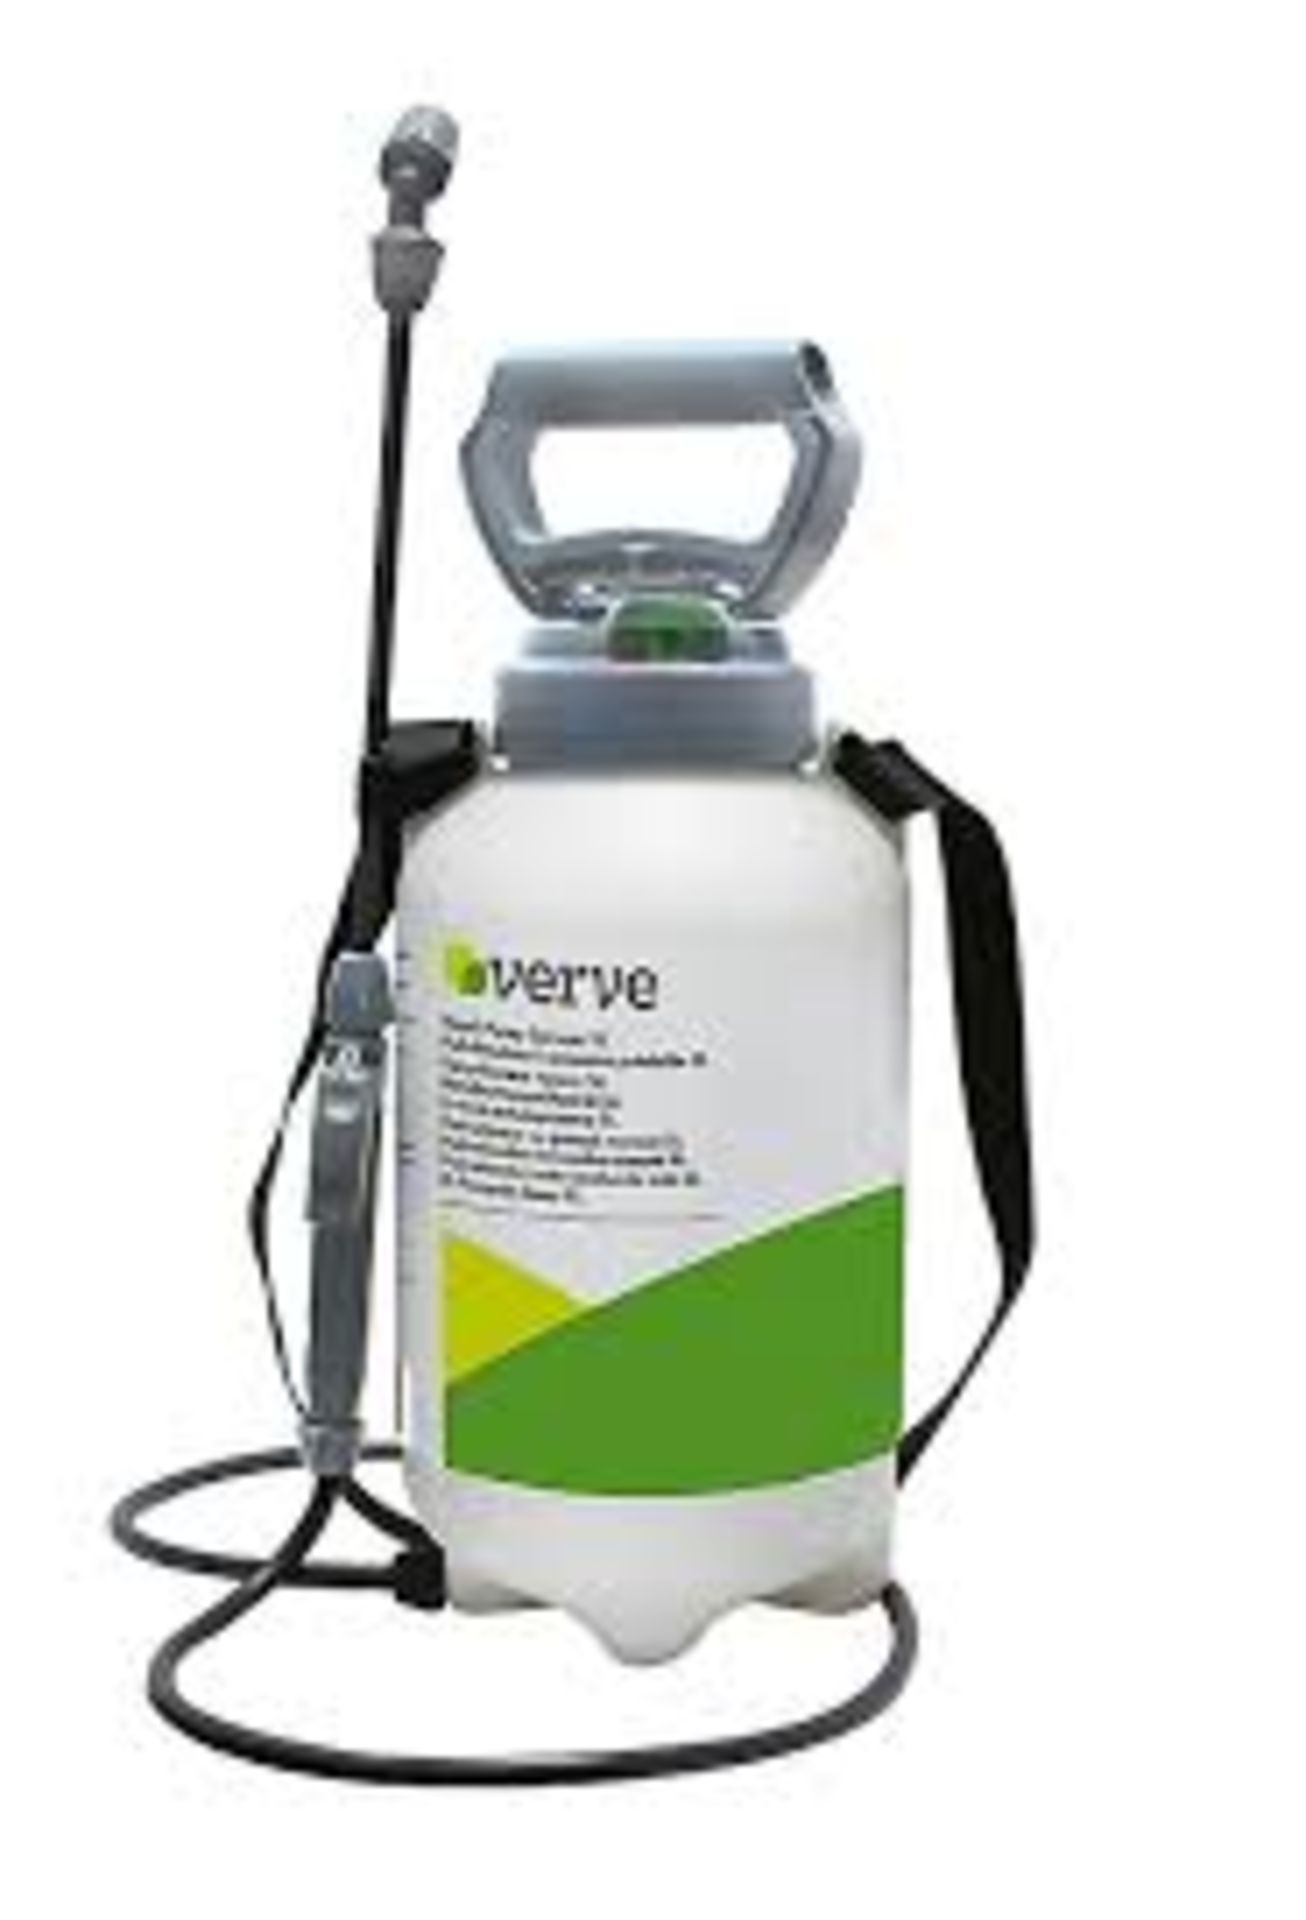 Verve Hand Pump sprayer 5L. - ER51. This hand pump sprayer is suitable for water, insecticides,